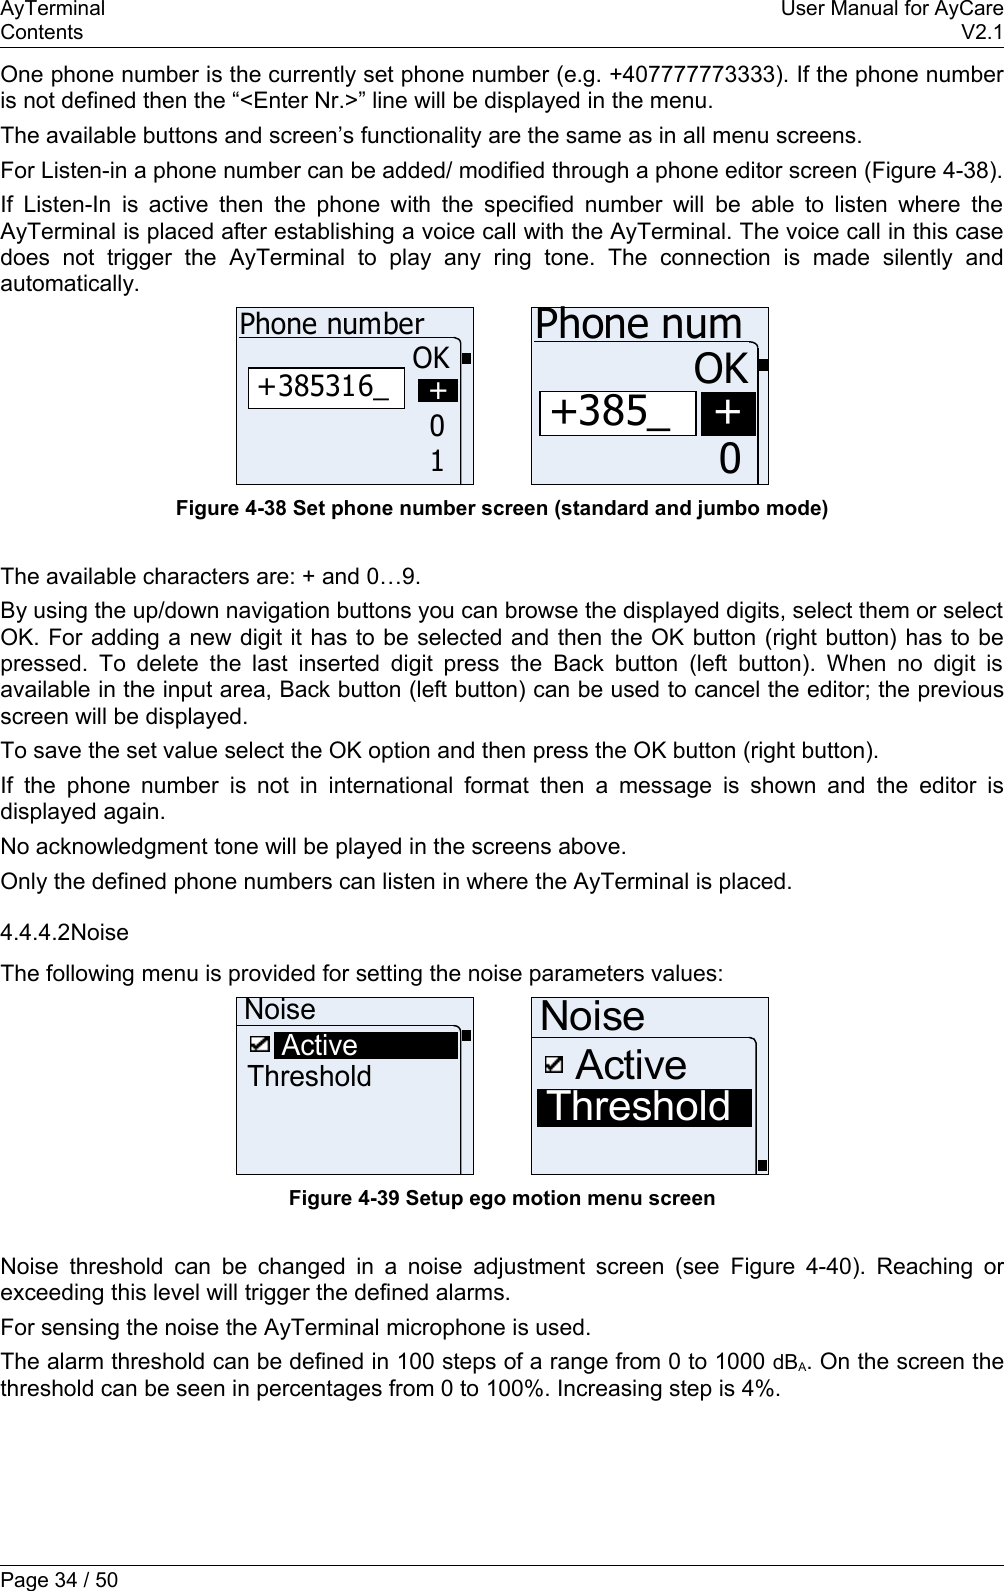 AyTerminal User Manual for AyCareContents V2.1One phone number is the currently set phone number (e.g. +407777773333). If the phone number is not defined then the “&lt;Enter Nr.&gt;” line will be displayed in the menu.The available buttons and screen’s functionality are the same as in all menu screens.For Listen-in a phone number can be added/ modified through a phone editor screen (Figure 4-38).If Listen-In is active then the phone with the specified number will be able to listen where the AyTerminal is placed after establishing a voice call with the AyTerminal. The voice call in this case does   not   trigger   the   AyTerminal   to   play  any   ring  tone.   The   connection   is   made   silently   and automatically. +385316_Phone numberOK10++385_Phone numOK0+Figure 4-38 Set phone number screen (standard and jumbo mode)The available characters are: + and 0…9.By using the up/down navigation buttons you can browse the displayed digits, select them or select OK. For adding a new digit it has to be selected and then the OK button (right button) has to be pressed. To delete the last inserted digit press the Back button (left button). When no digit is available in the input area, Back button (left button) can be used to cancel the editor; the previous screen will be displayed.To save the set value select the OK option and then press the OK button (right button).If the phone number is not in international format then a message is shown and the editor is displayed again.No acknowledgment tone will be played in the screens above.Only the defined phone numbers can listen in where the AyTerminal is placed.4.4.4.2NoiseThe following menu is provided for setting the noise parameters values:NoiseThresholdActiveNoiseThresholdActiveFigure 4-39 Setup ego motion menu screenNoise threshold can be changed in a noise adjustment screen (see  Figure 4-40). Reaching or exceeding this level will trigger the defined alarms.For sensing the noise the AyTerminal microphone is used.The alarm threshold can be defined in 100 steps of a range from 0 to 1000 dBA. On the screen the threshold can be seen in percentages from 0 to 100%. Increasing step is 4%.Page 34 / 50